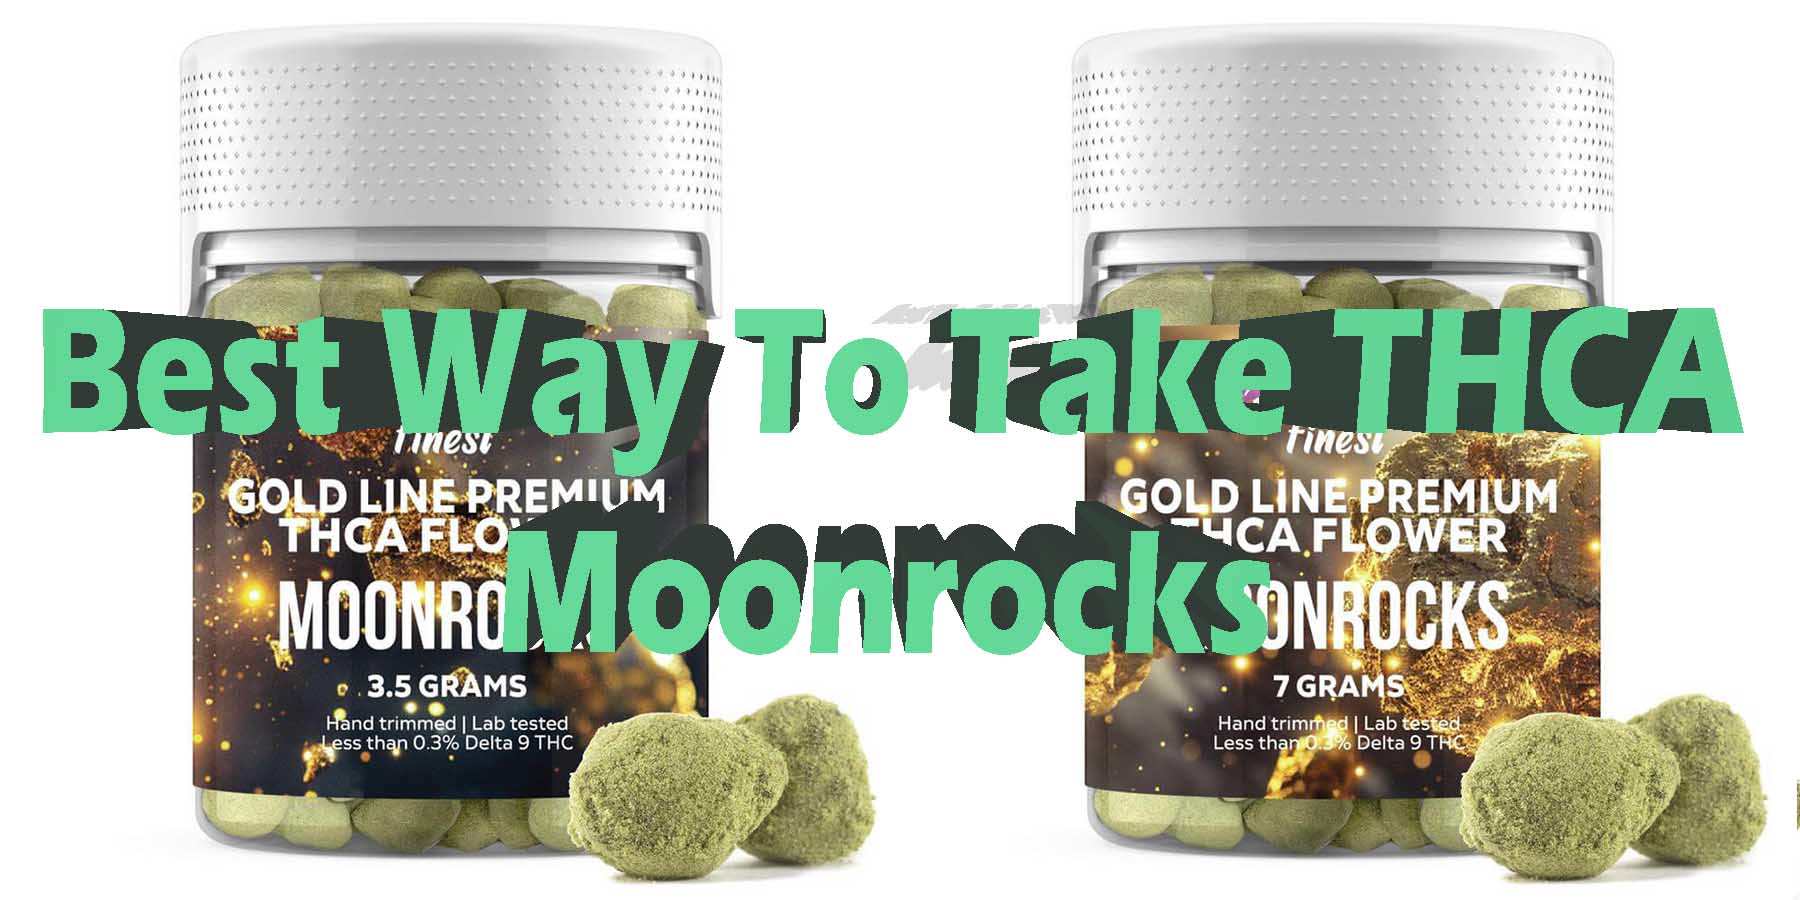 Best Way To Take THCA Moonrocks WhereToGet HowToGetNearMe BestPlace LowestPrice Coupon Discount For Smoking Best High Smoke Shop Online Near Me Binoid.